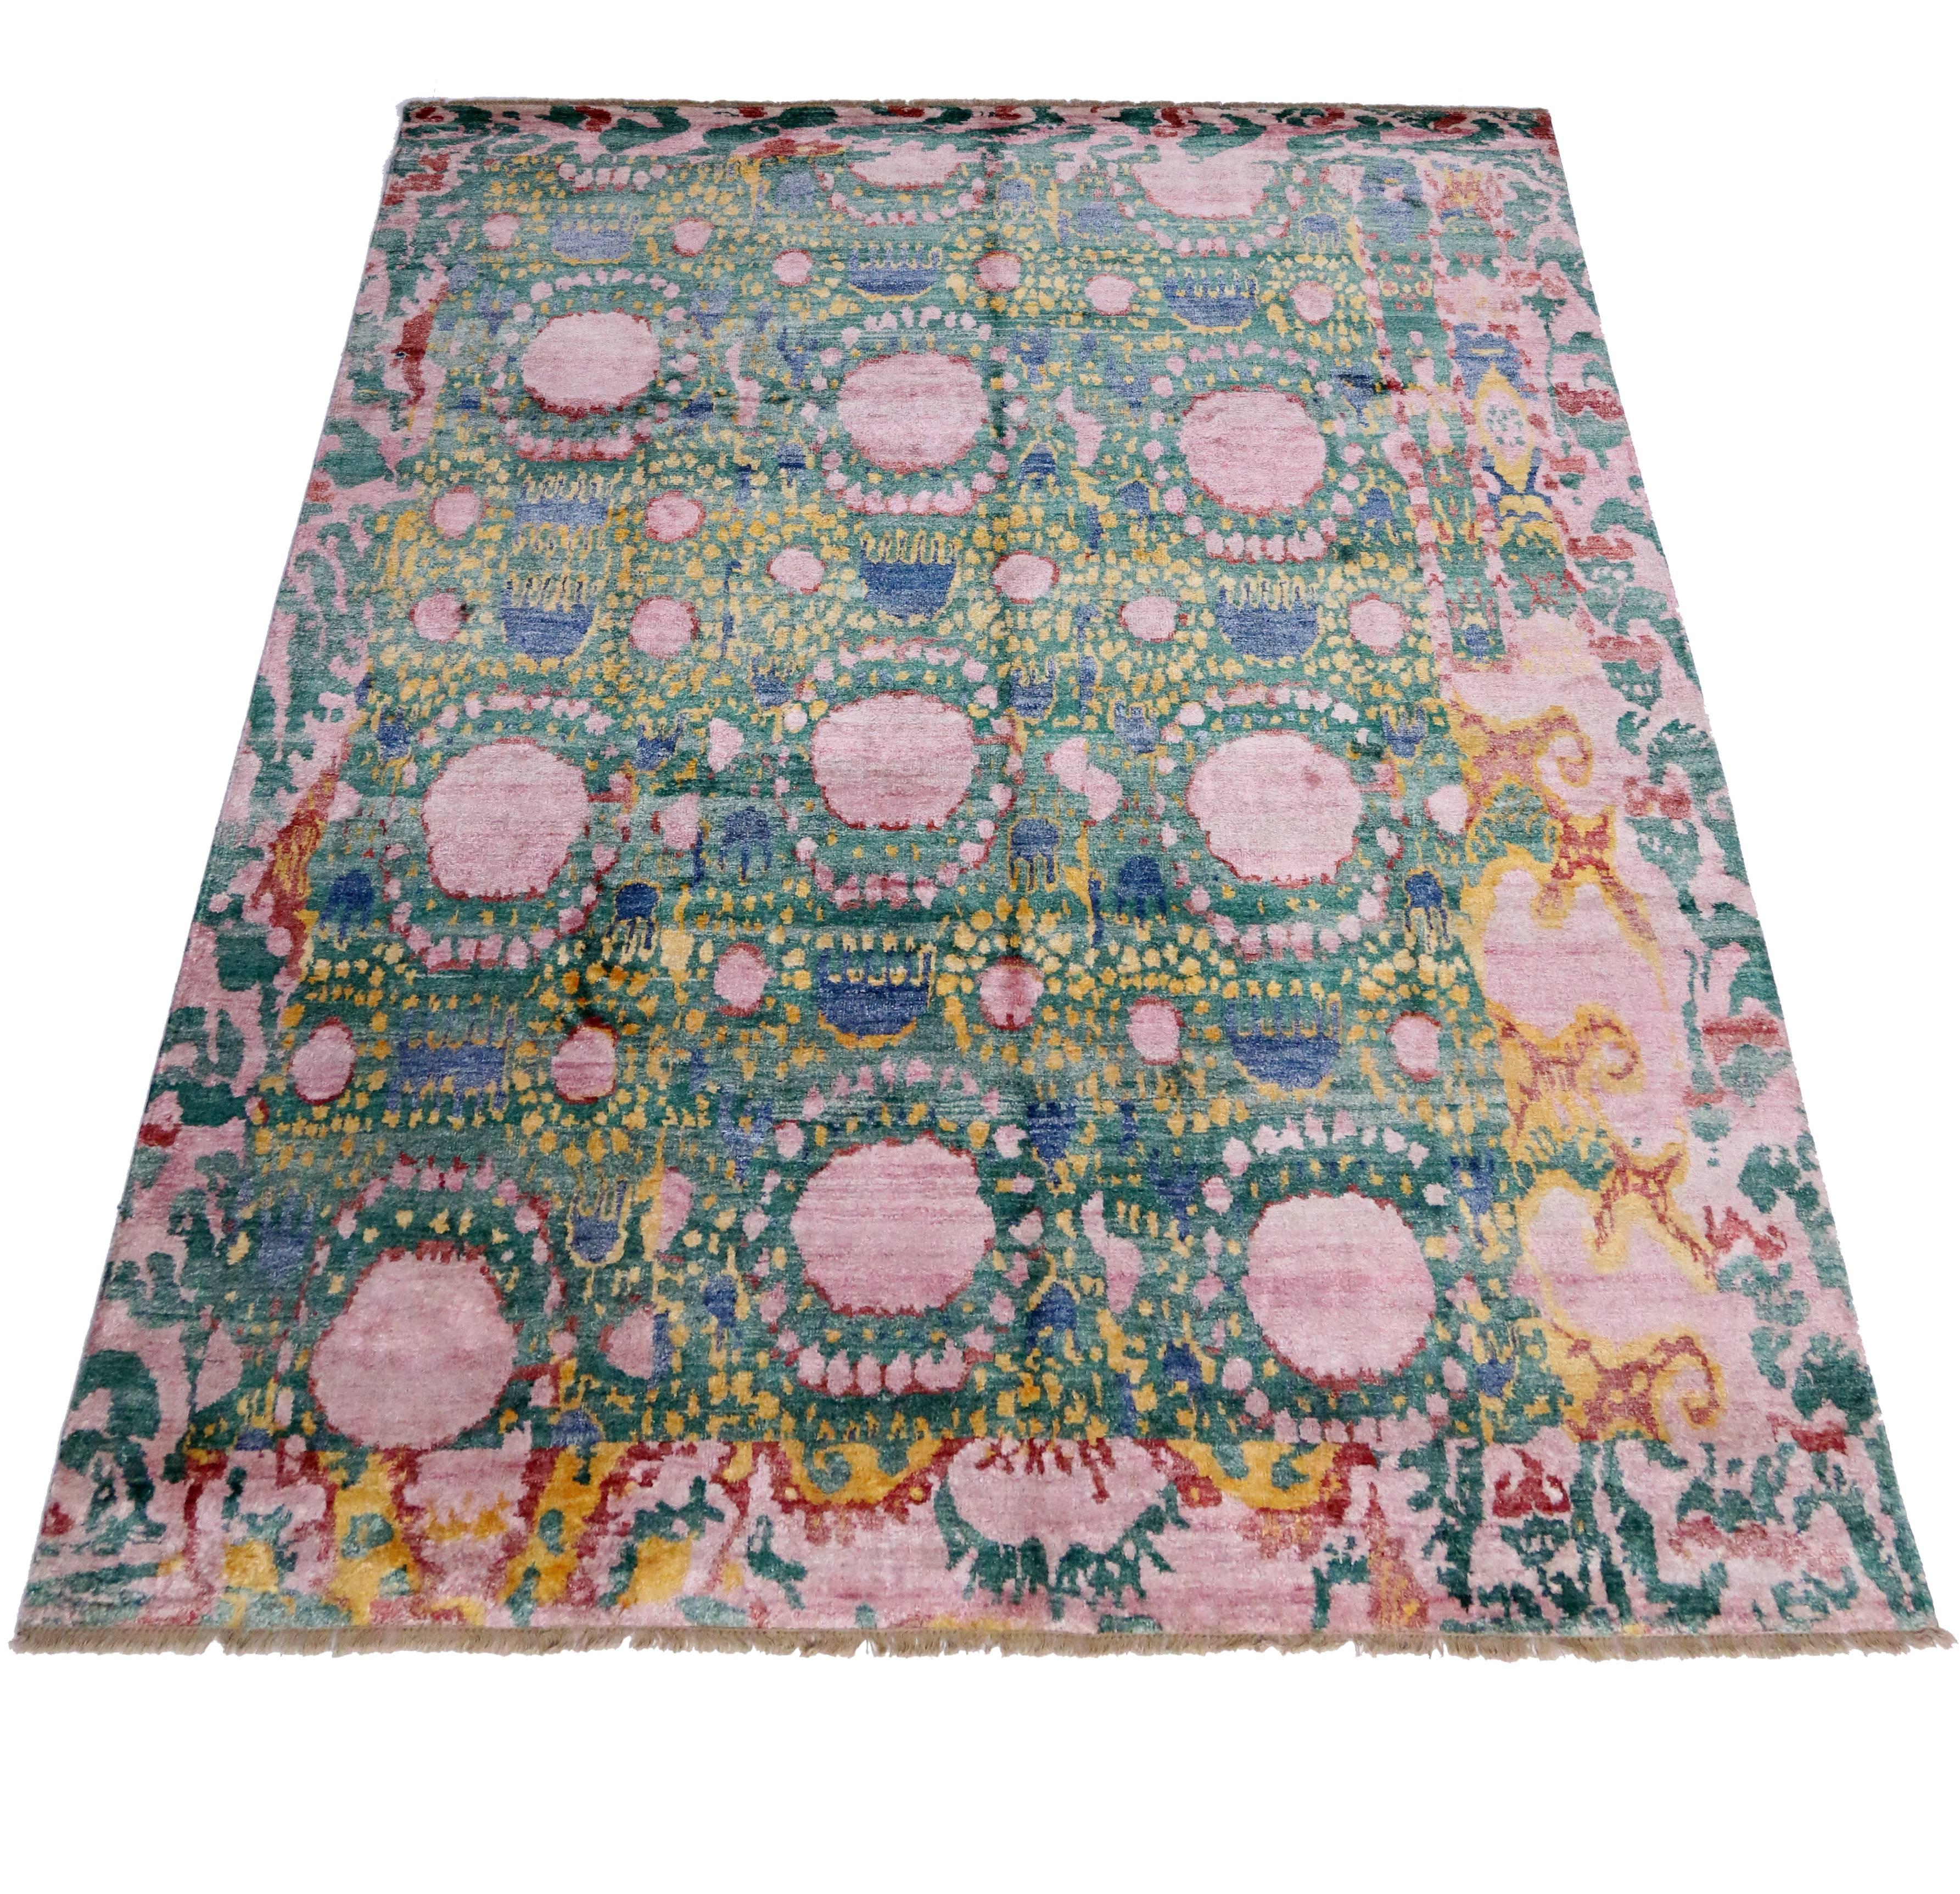 Indian Contemporary and Abstract 'Psychedelic Fantasy' Ikat Area Rug